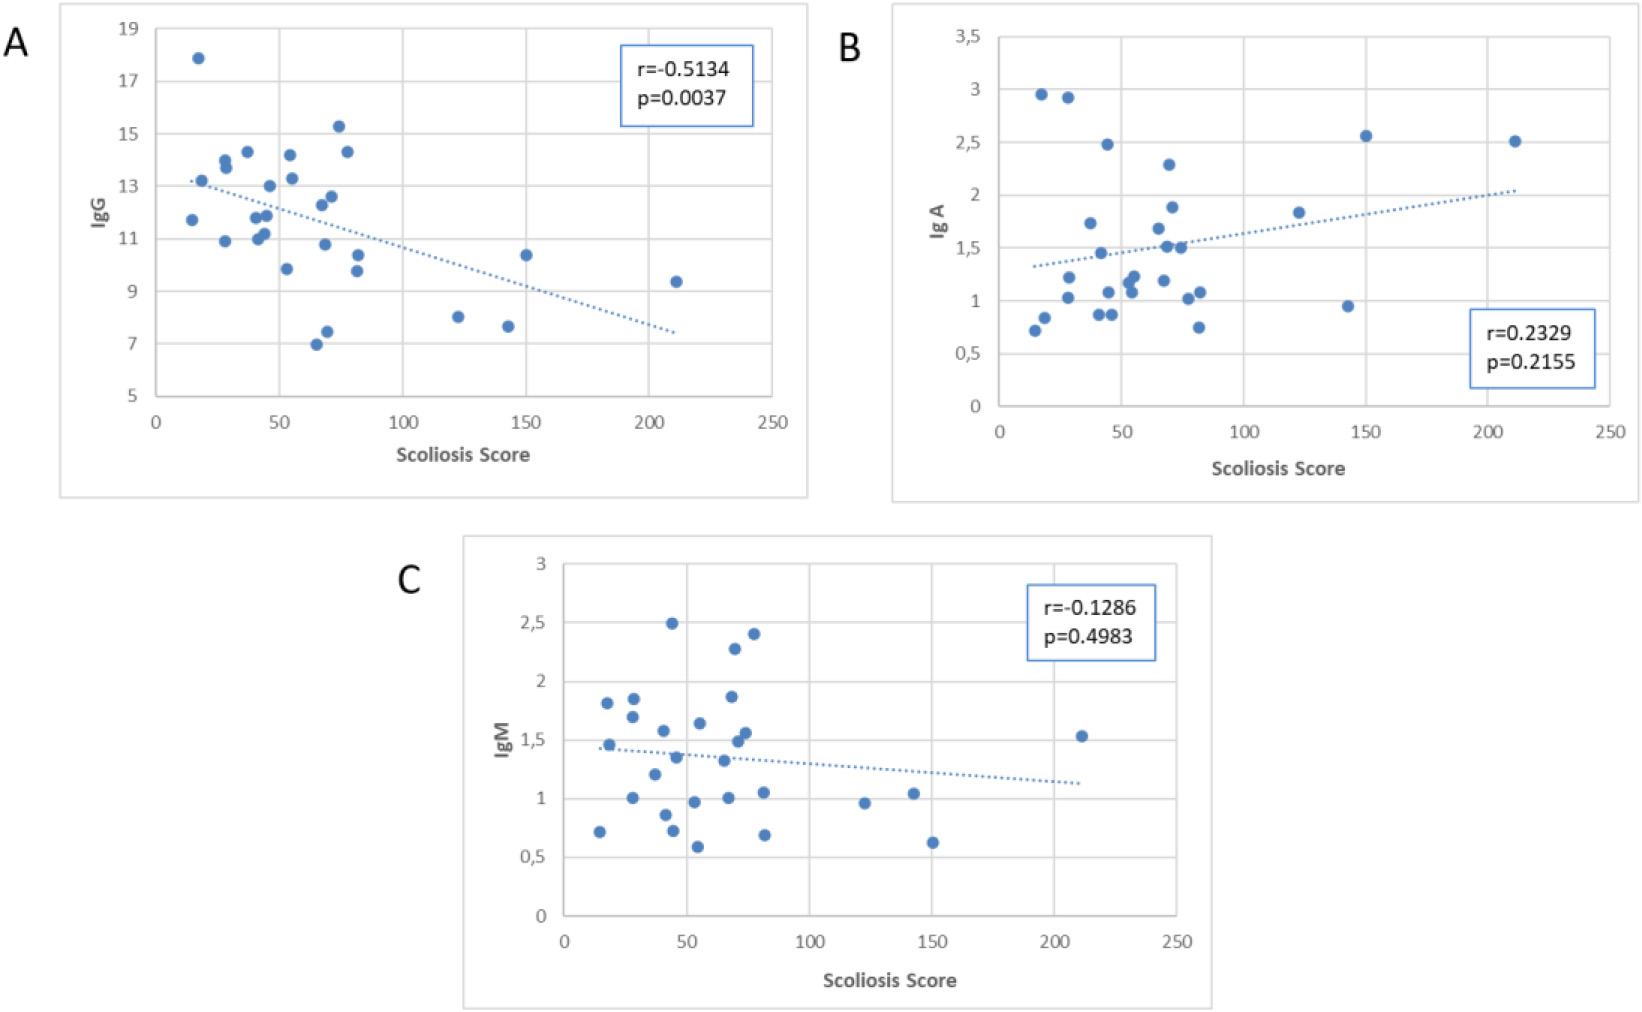 Scatter plot of the association of the Scoliosis Score with immunoglobulins.